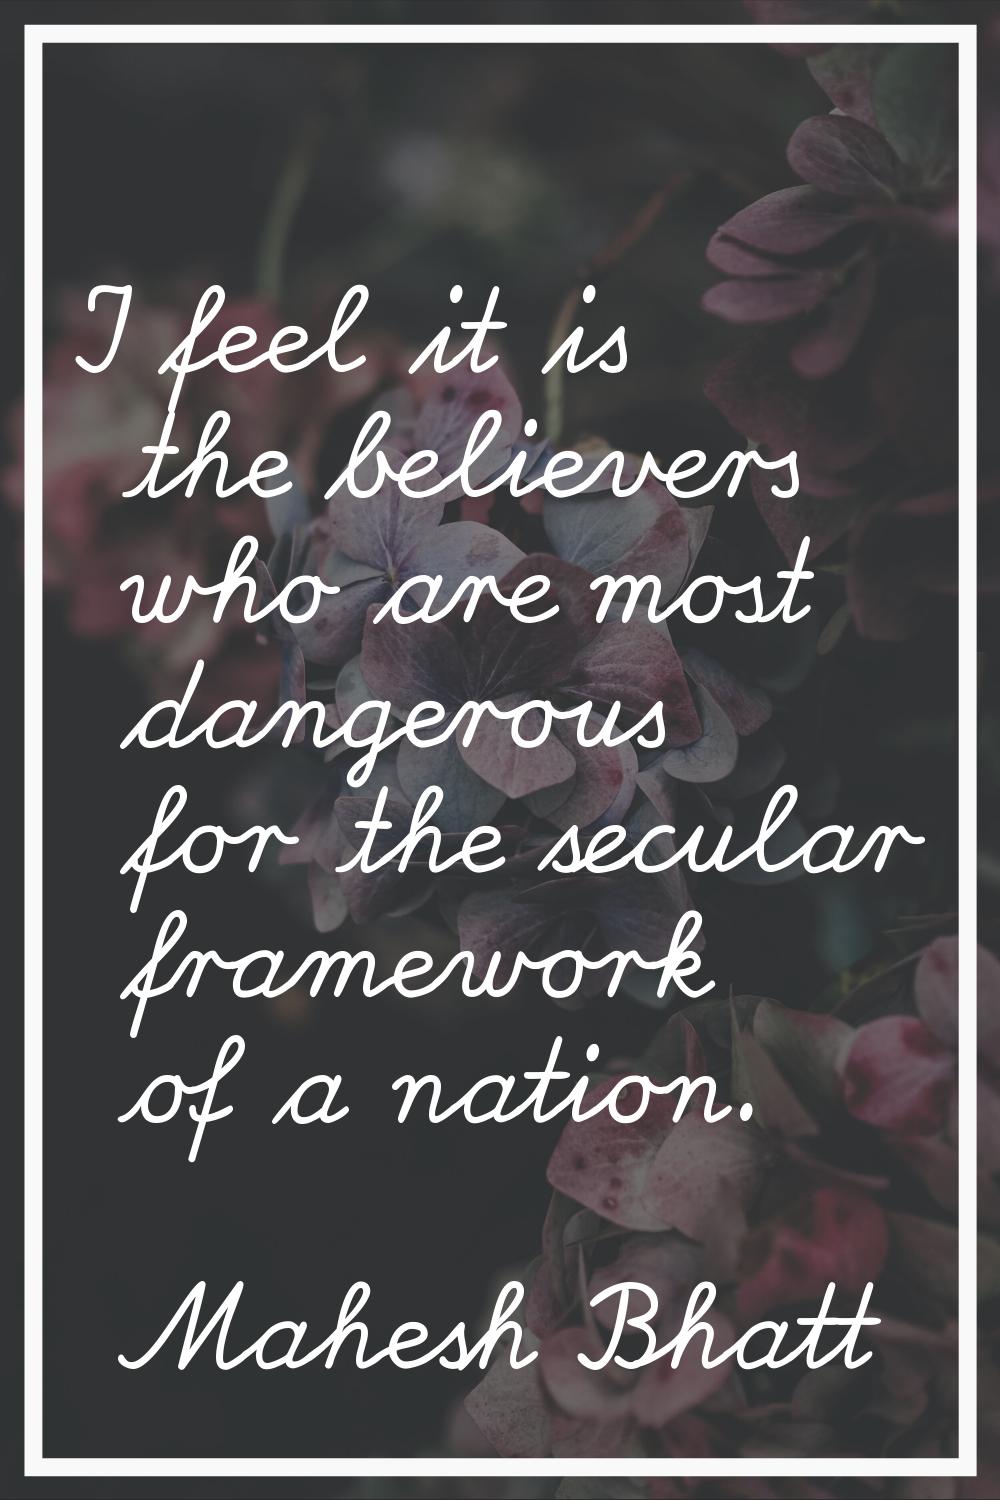 I feel it is the believers who are most dangerous for the secular framework of a nation.